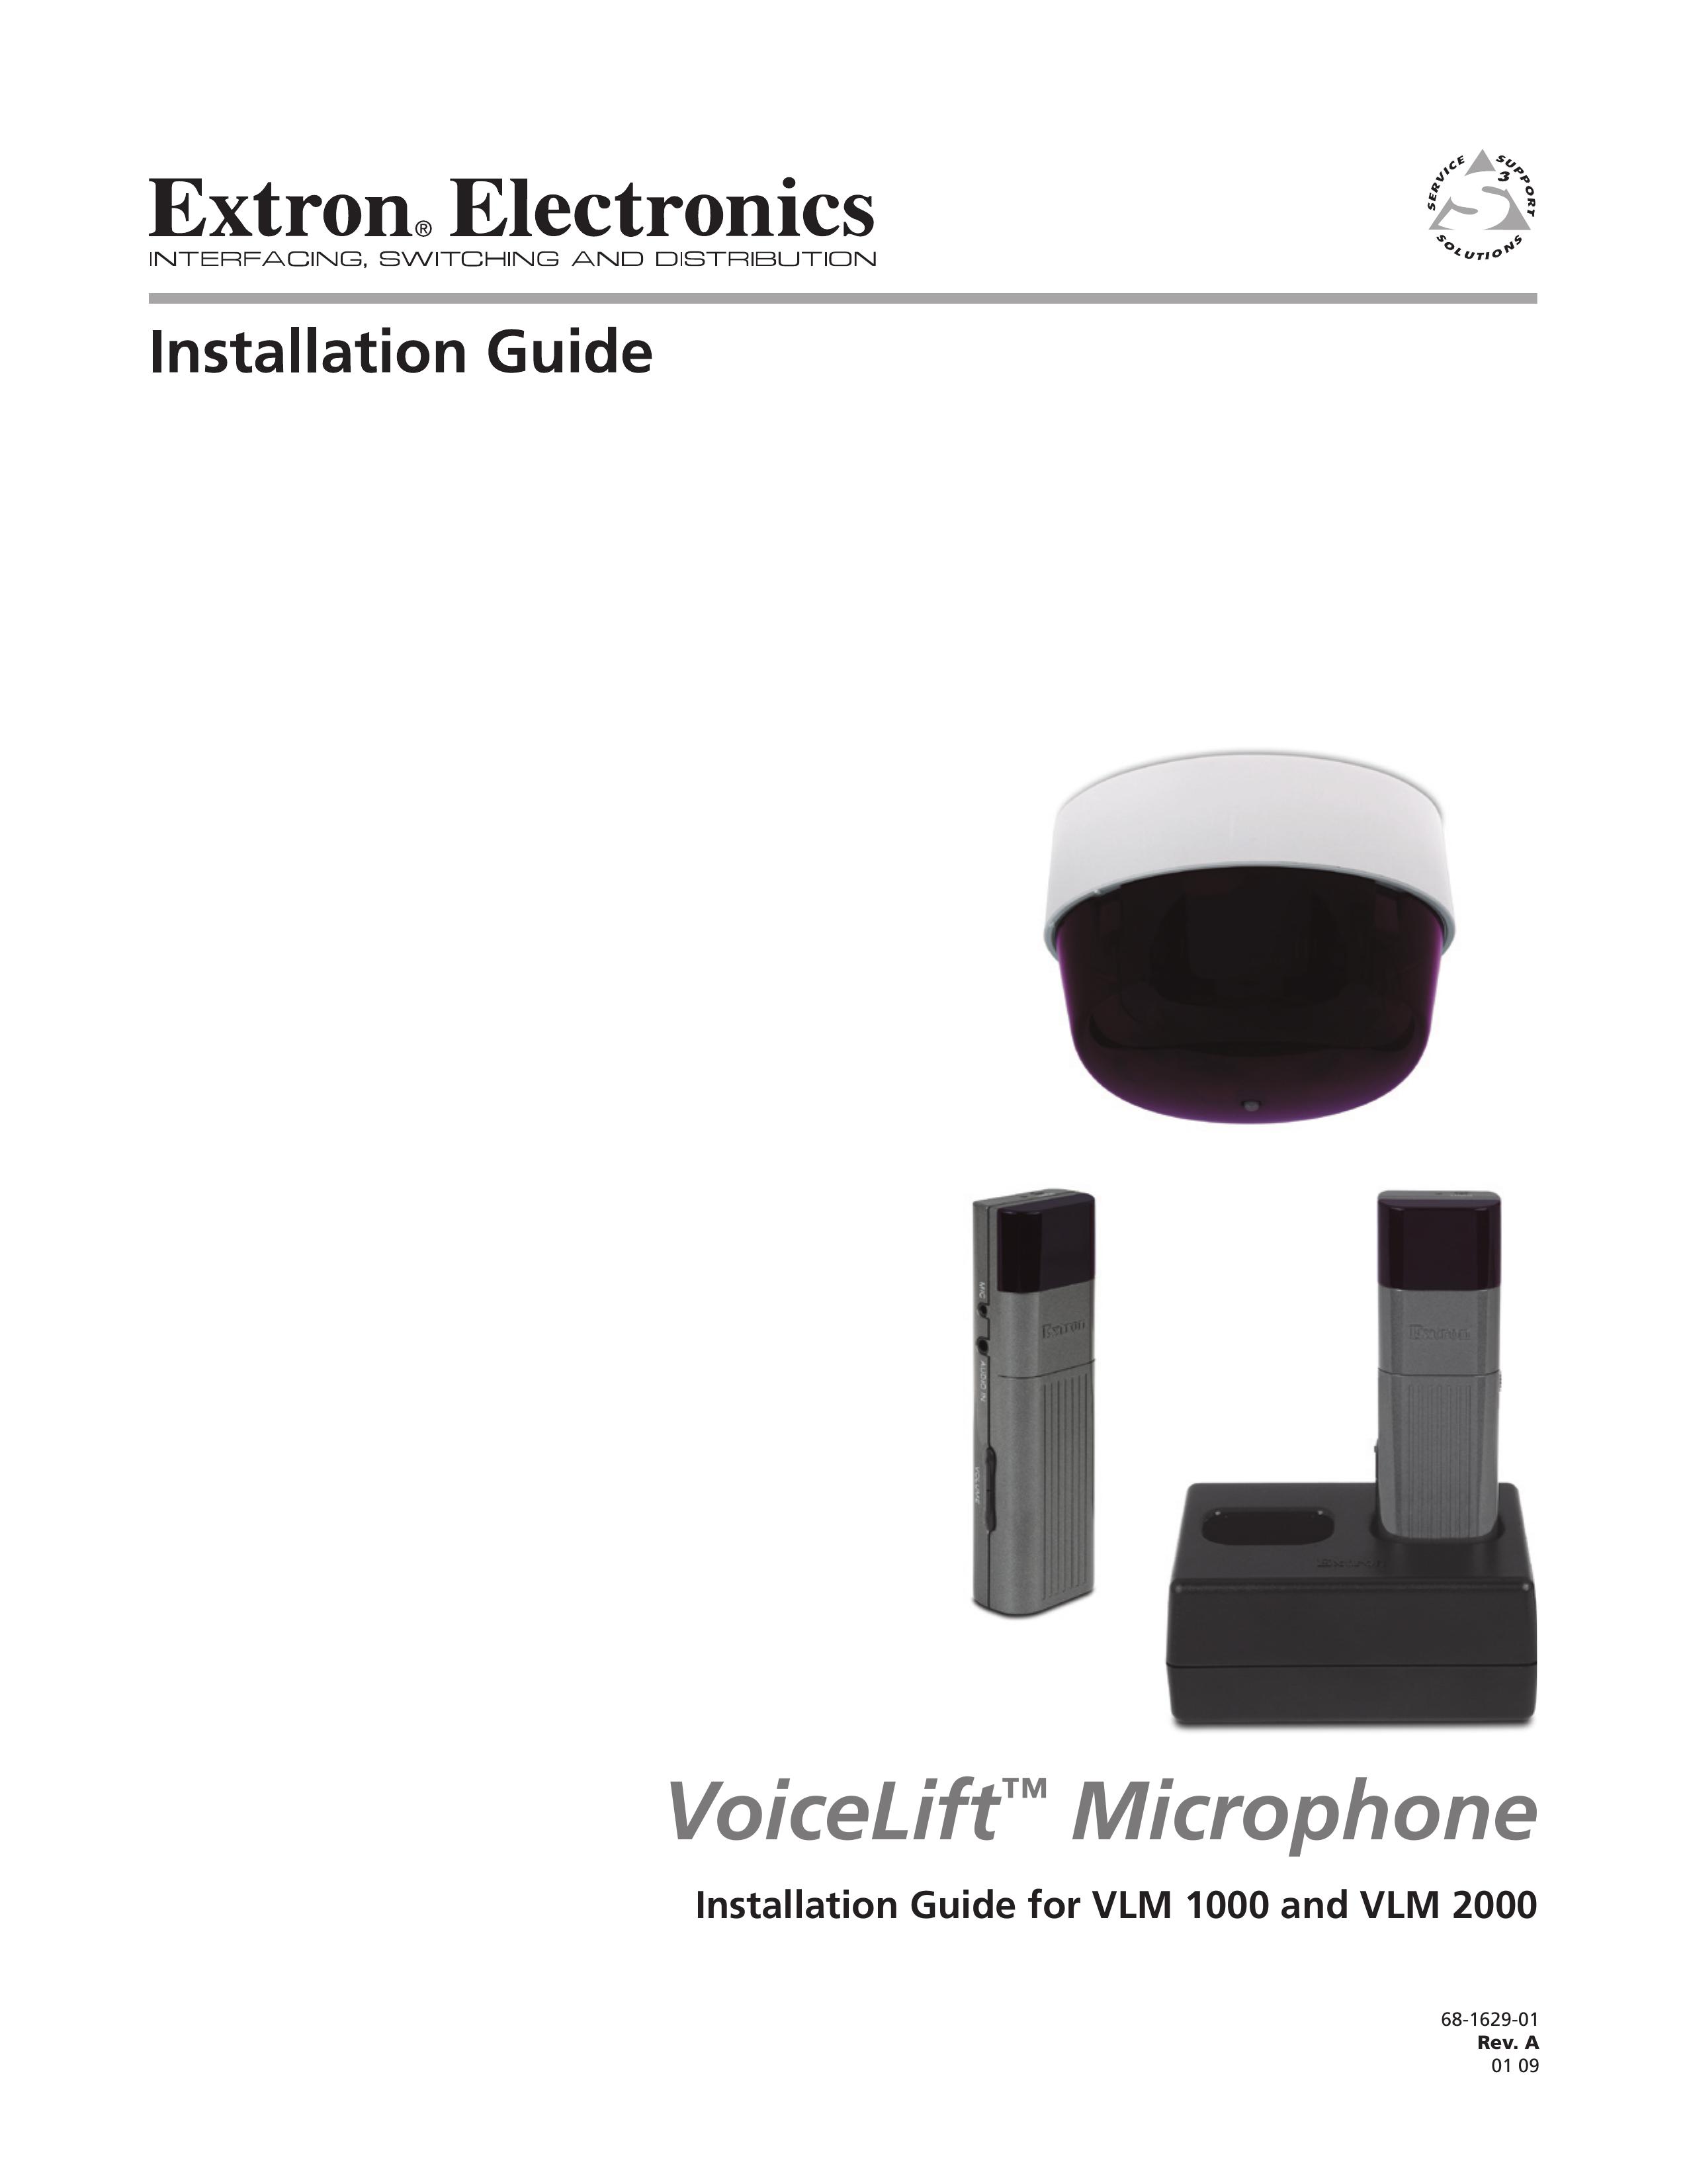 Extron electronic VLM 2000 Microphone User Manual